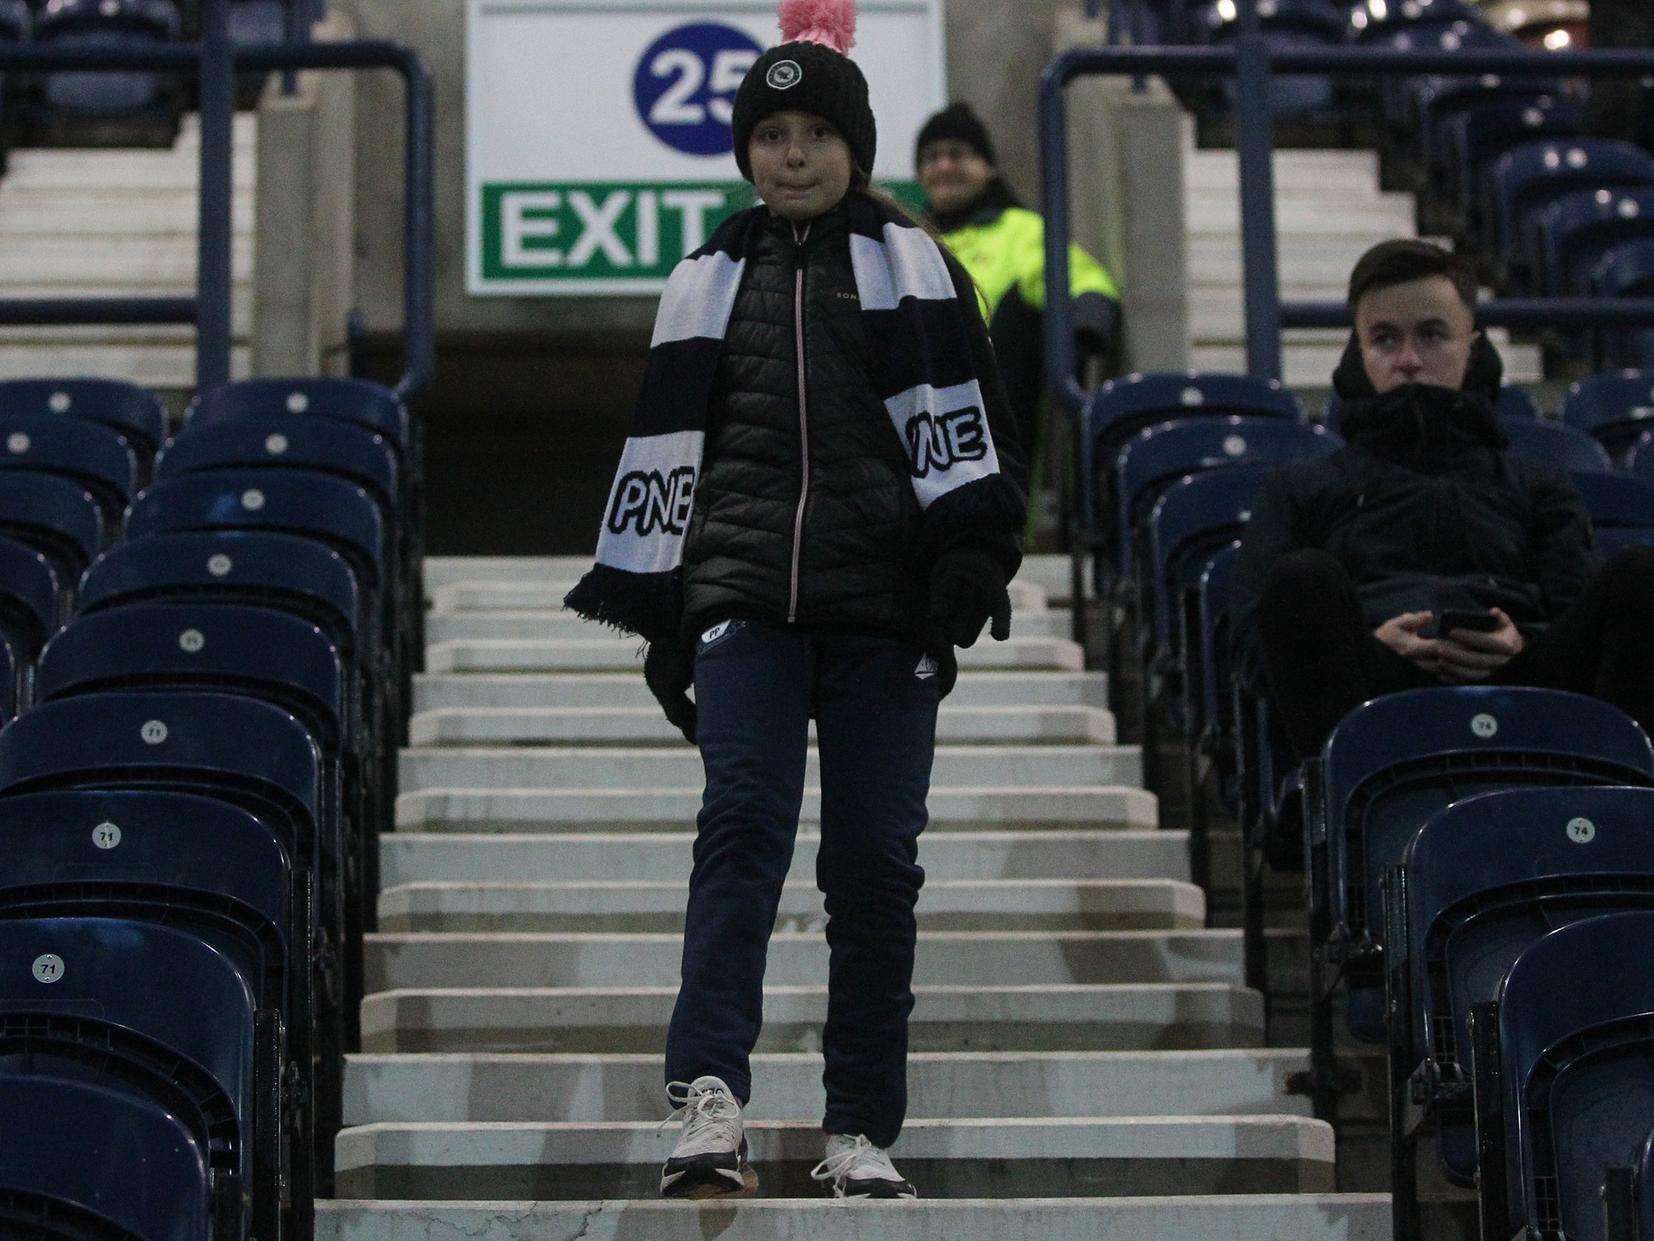 A young fan makes a familiar walk down the steps of the Alan Kelly Town End.